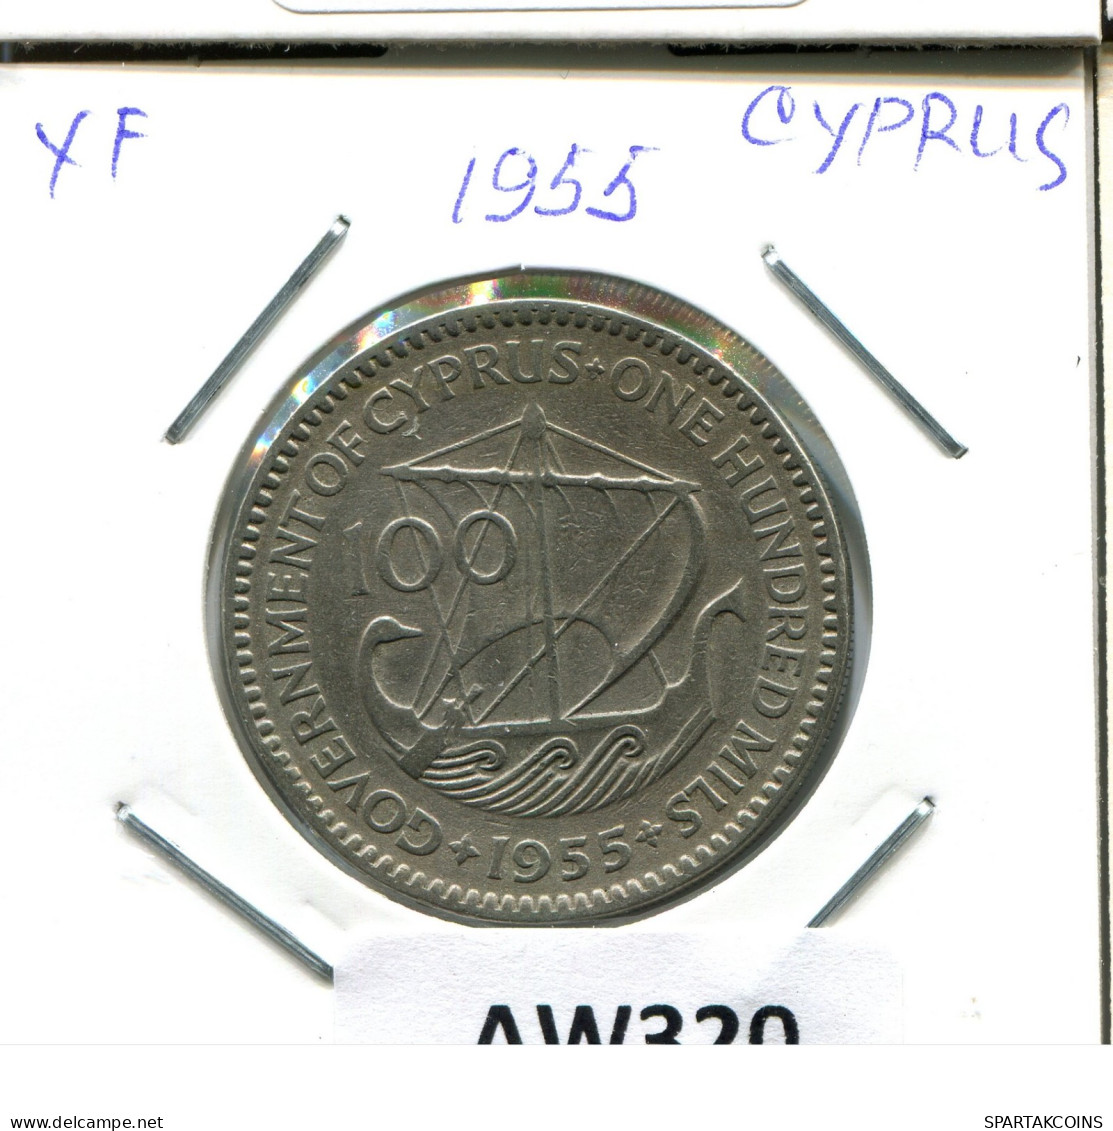 100 CENTS 1955 CHYPRE CYPRUS Pièce #AW320.F.A - Cipro